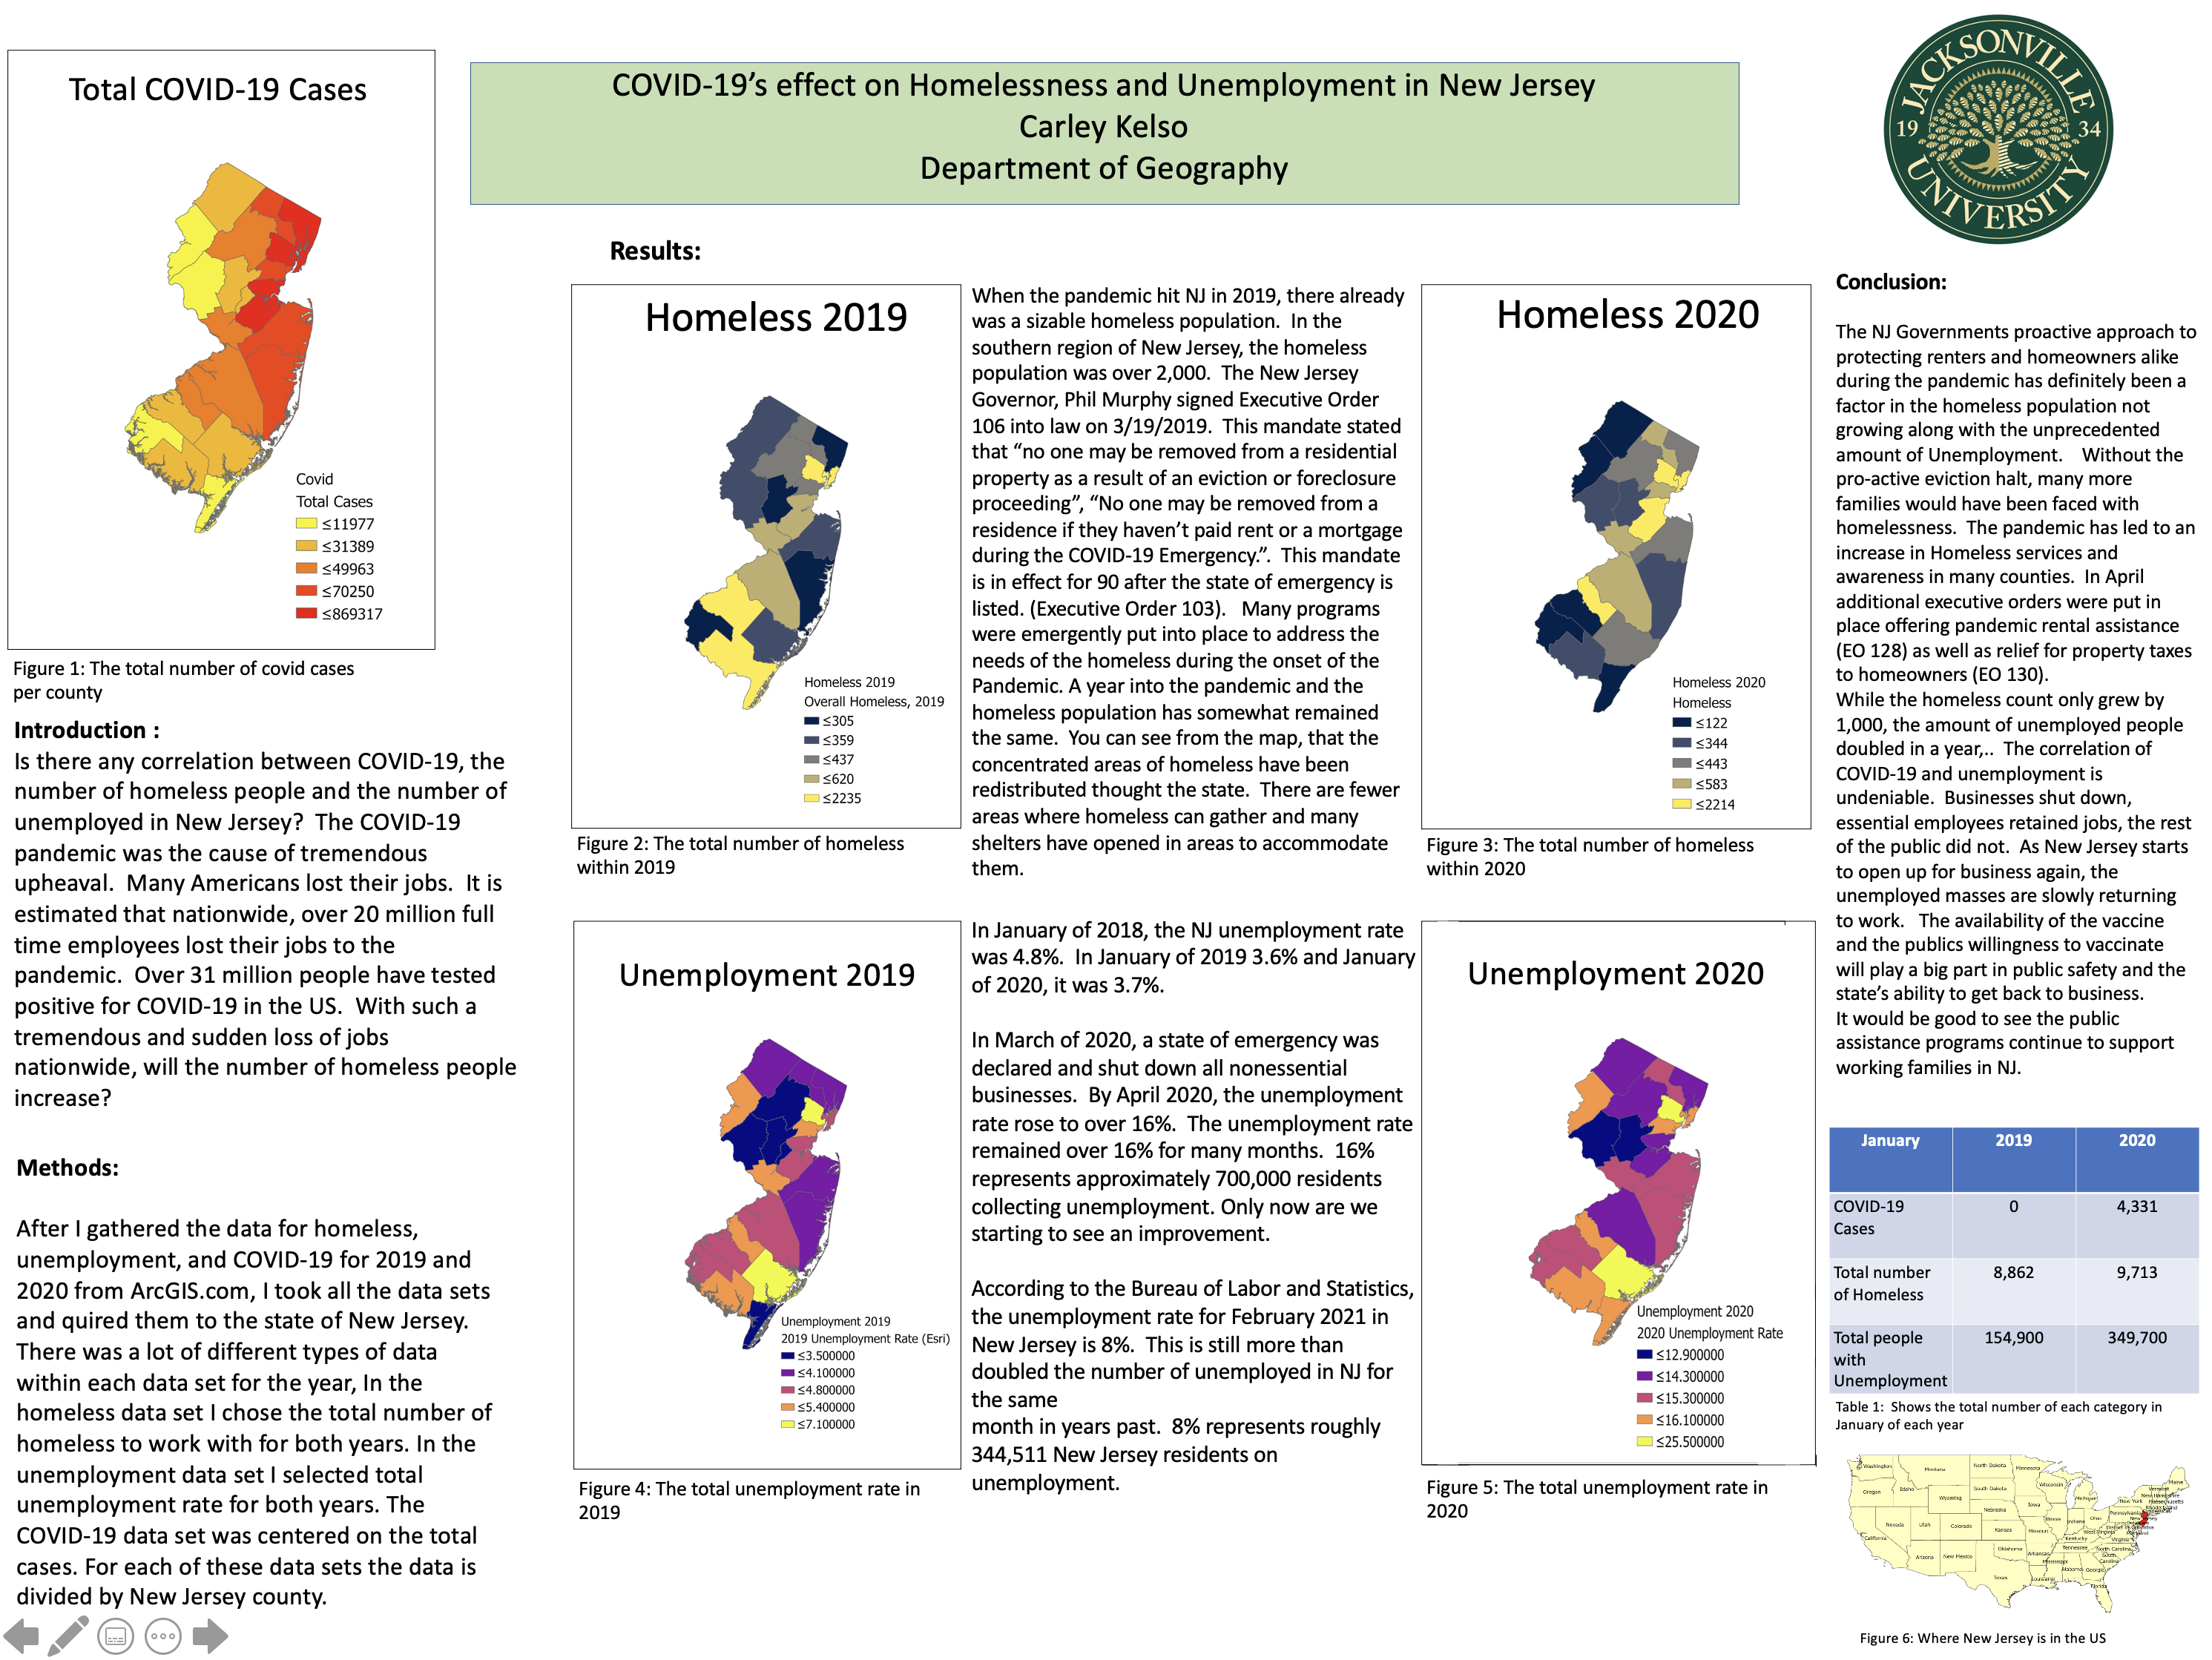 Showcase Image for COVID-19 - Homeless and Unemployment correlation in New Jersey